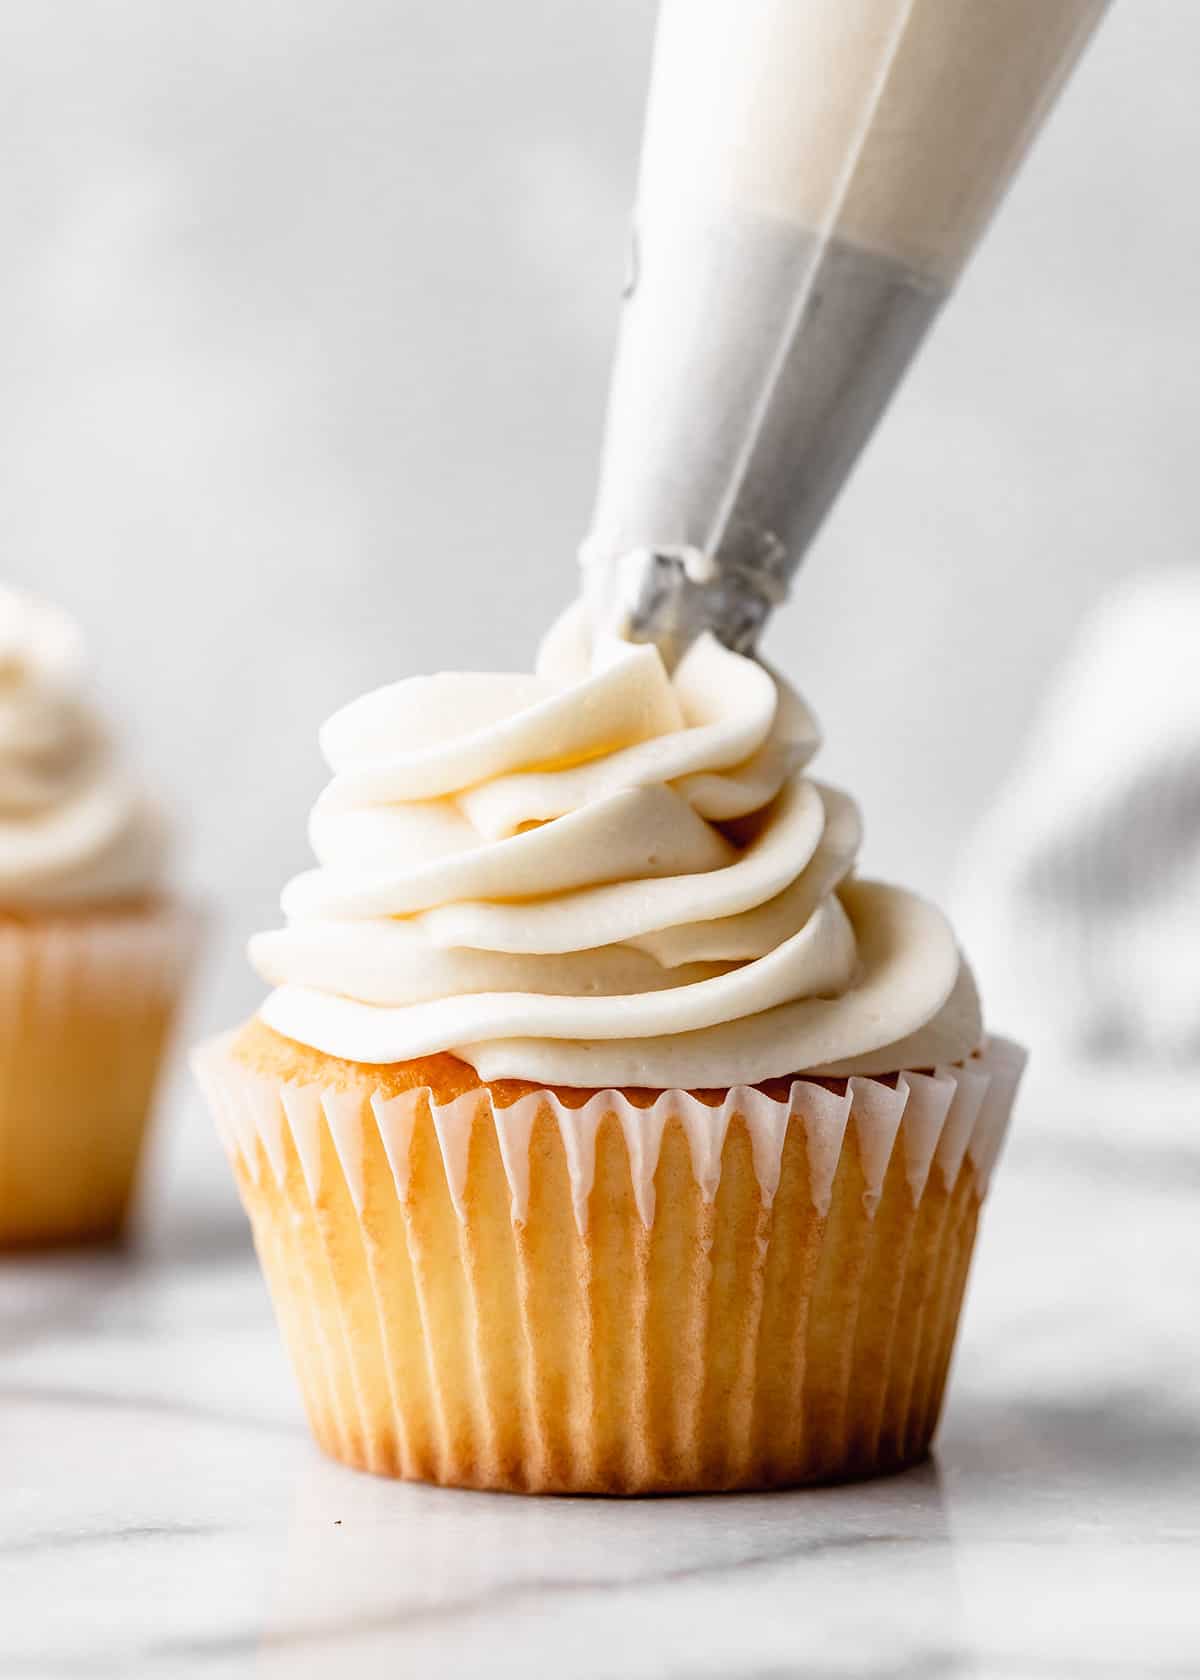 two photos showing How to Make Buttercream Frosting - beating butter, vanilla and salt